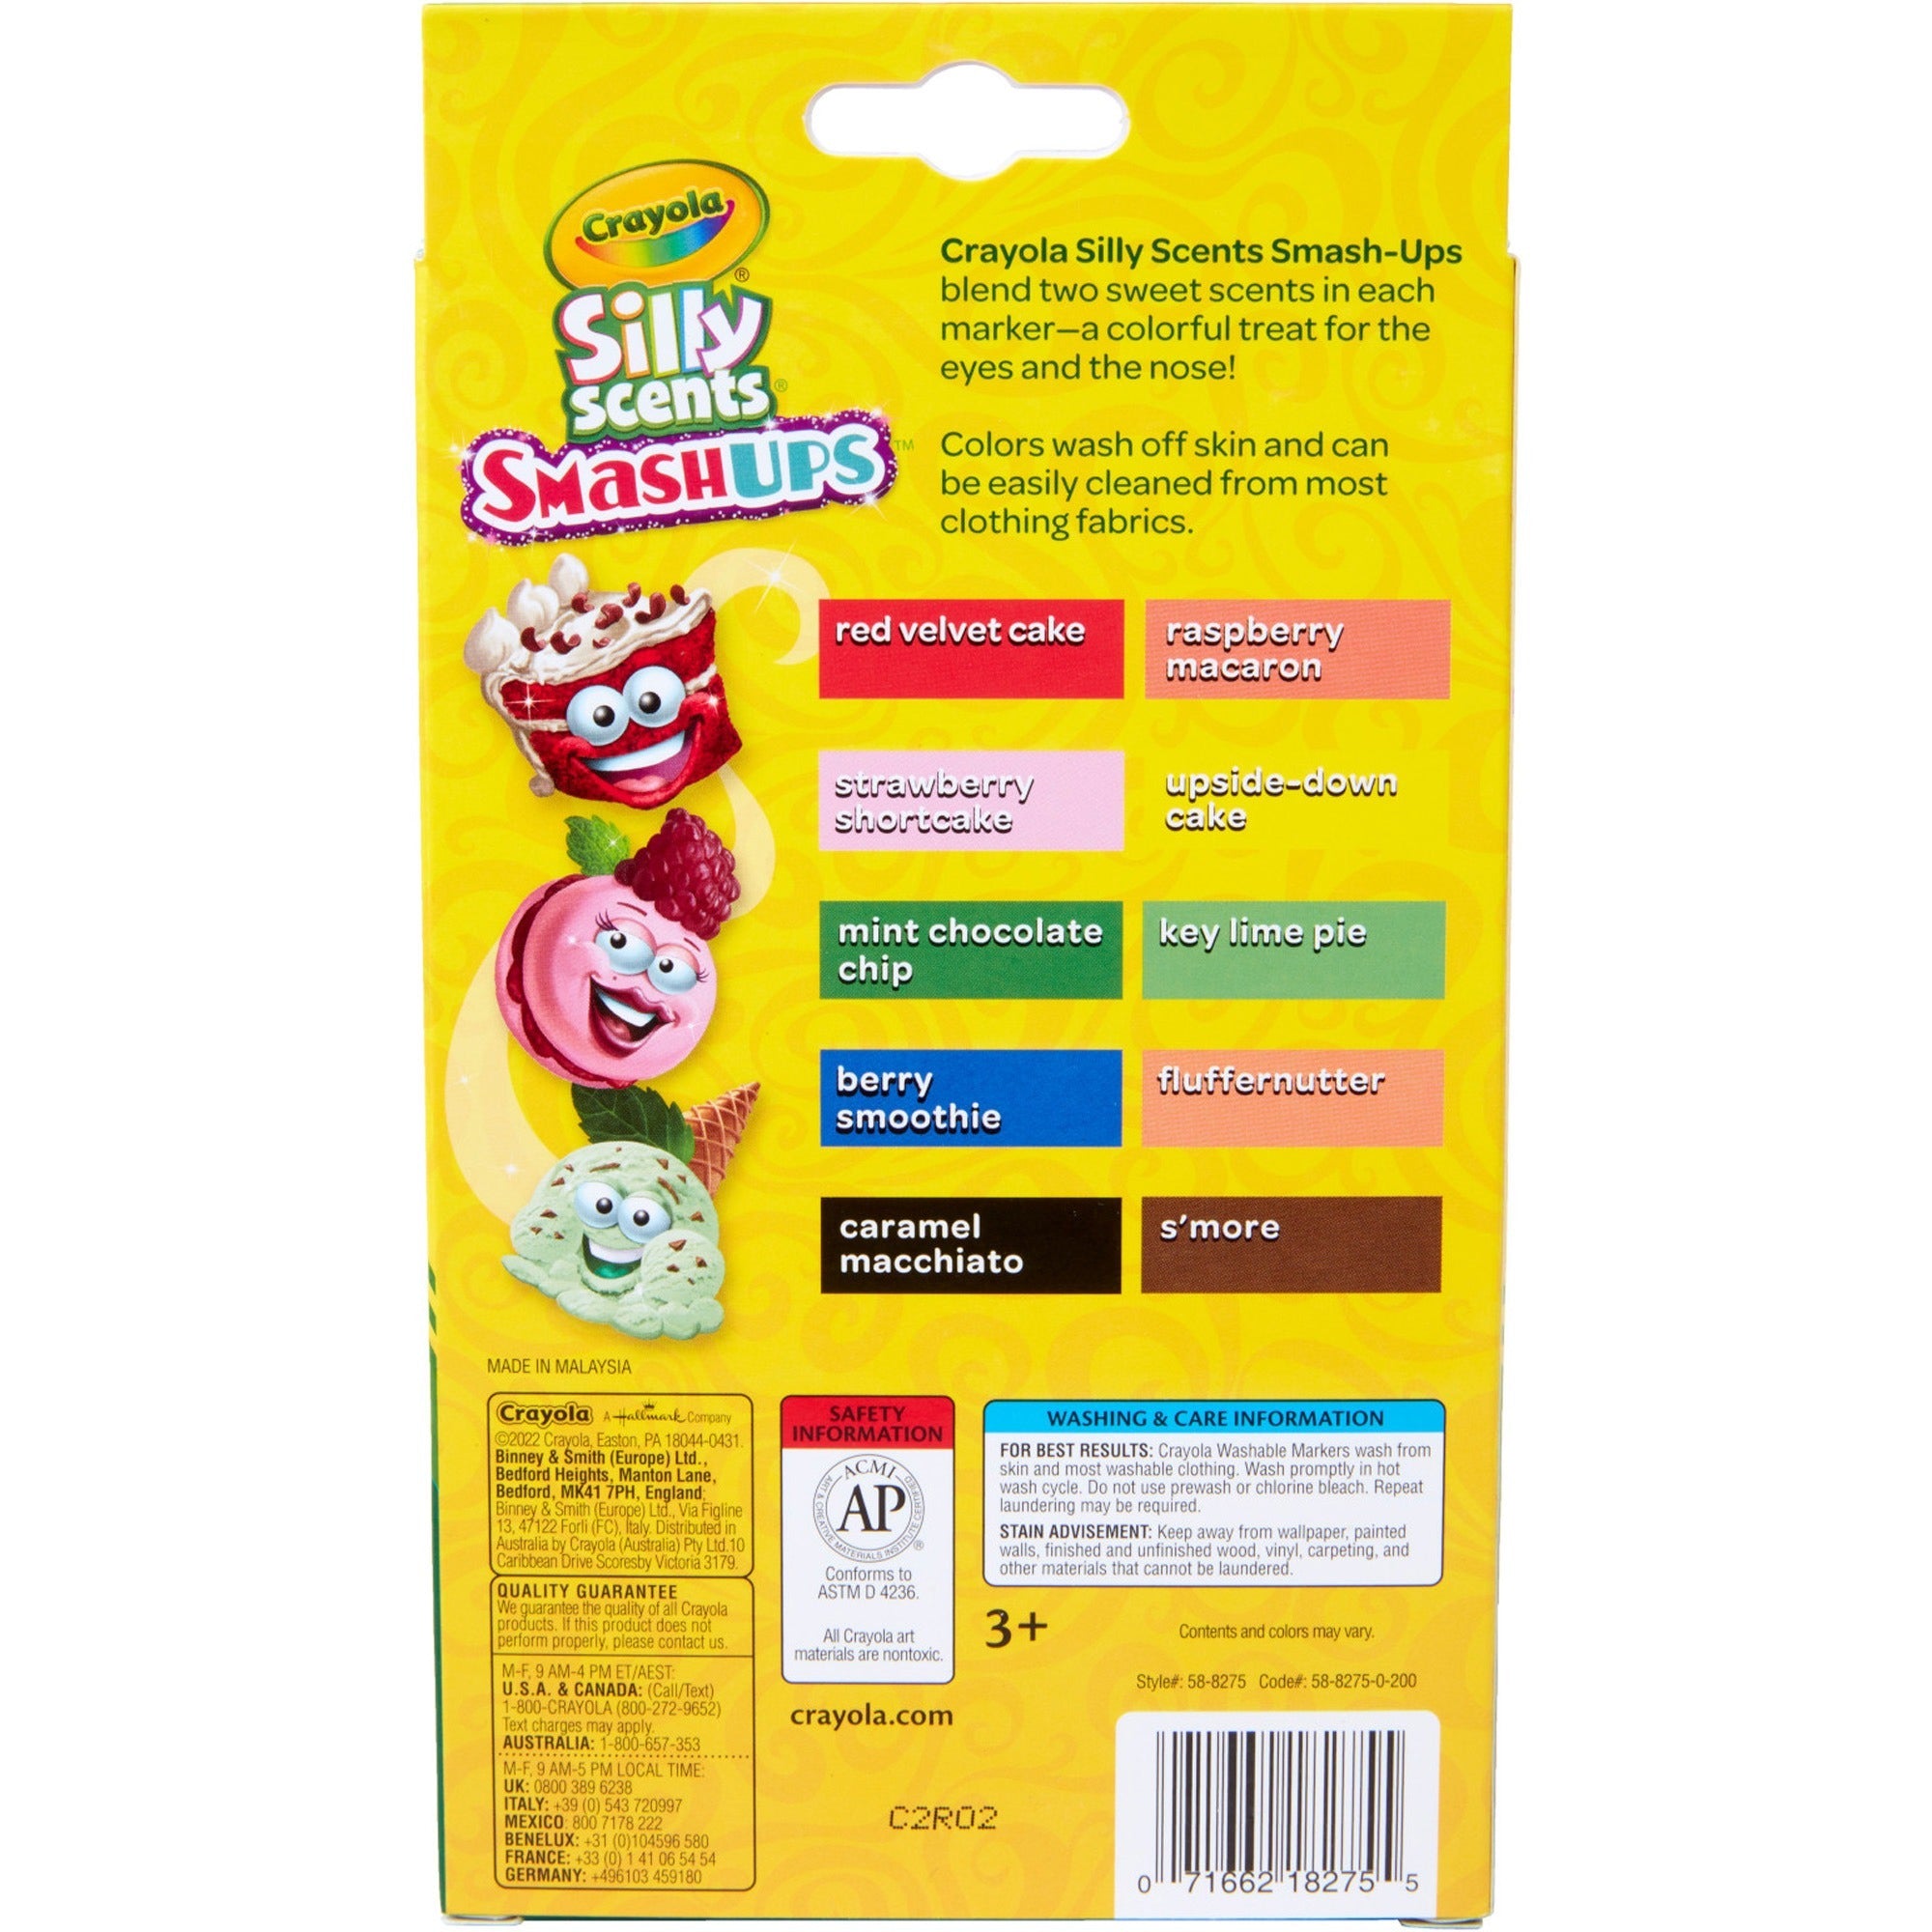 crayola-silly-scents-slim-scented-washable-markers-broad-marker-point-1-pack_cyo588275 - 4